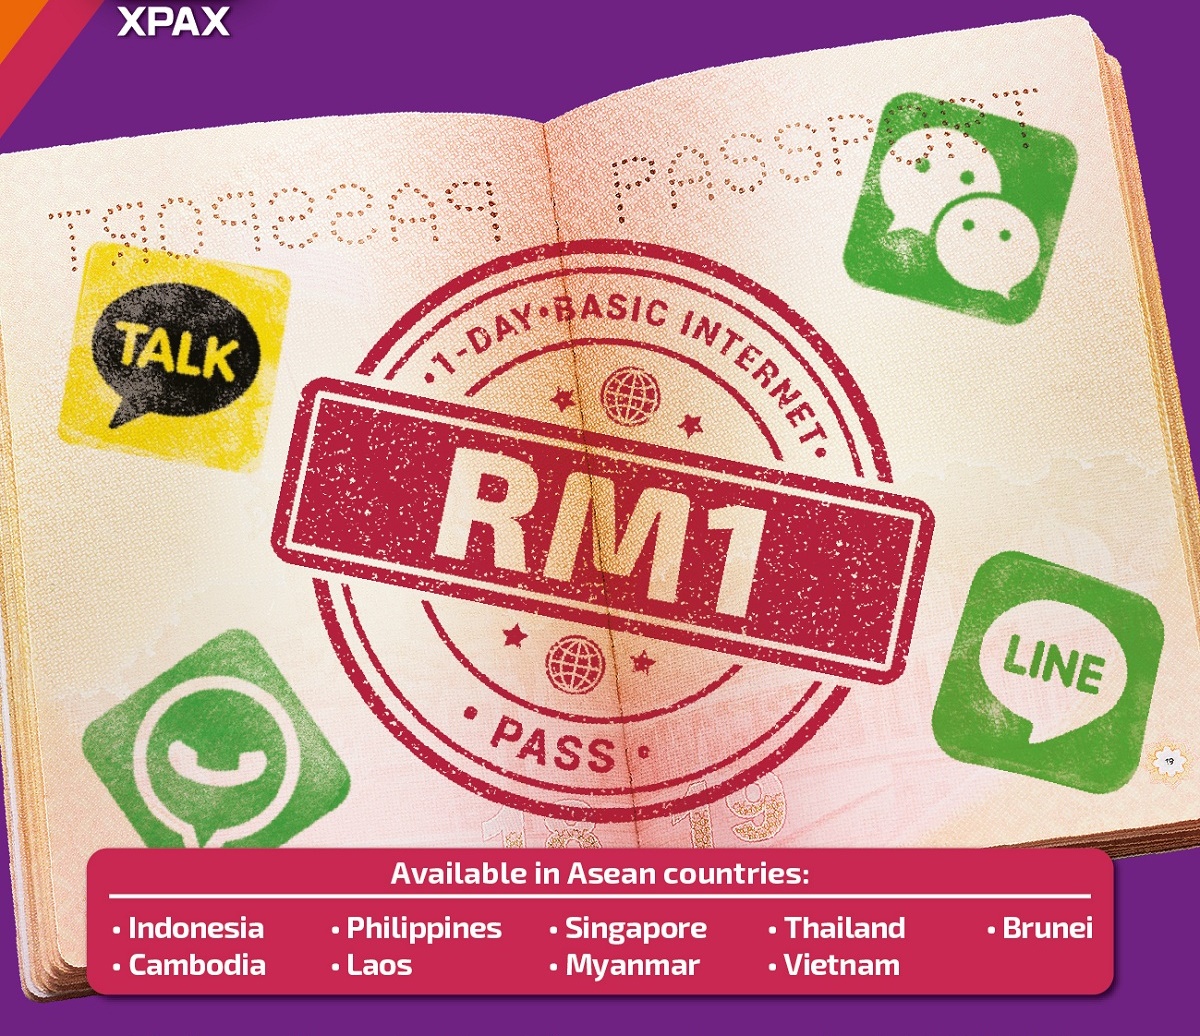 Xpax users can now enjoy roaming with 1-Day Basic Internet Pass from RM1 only